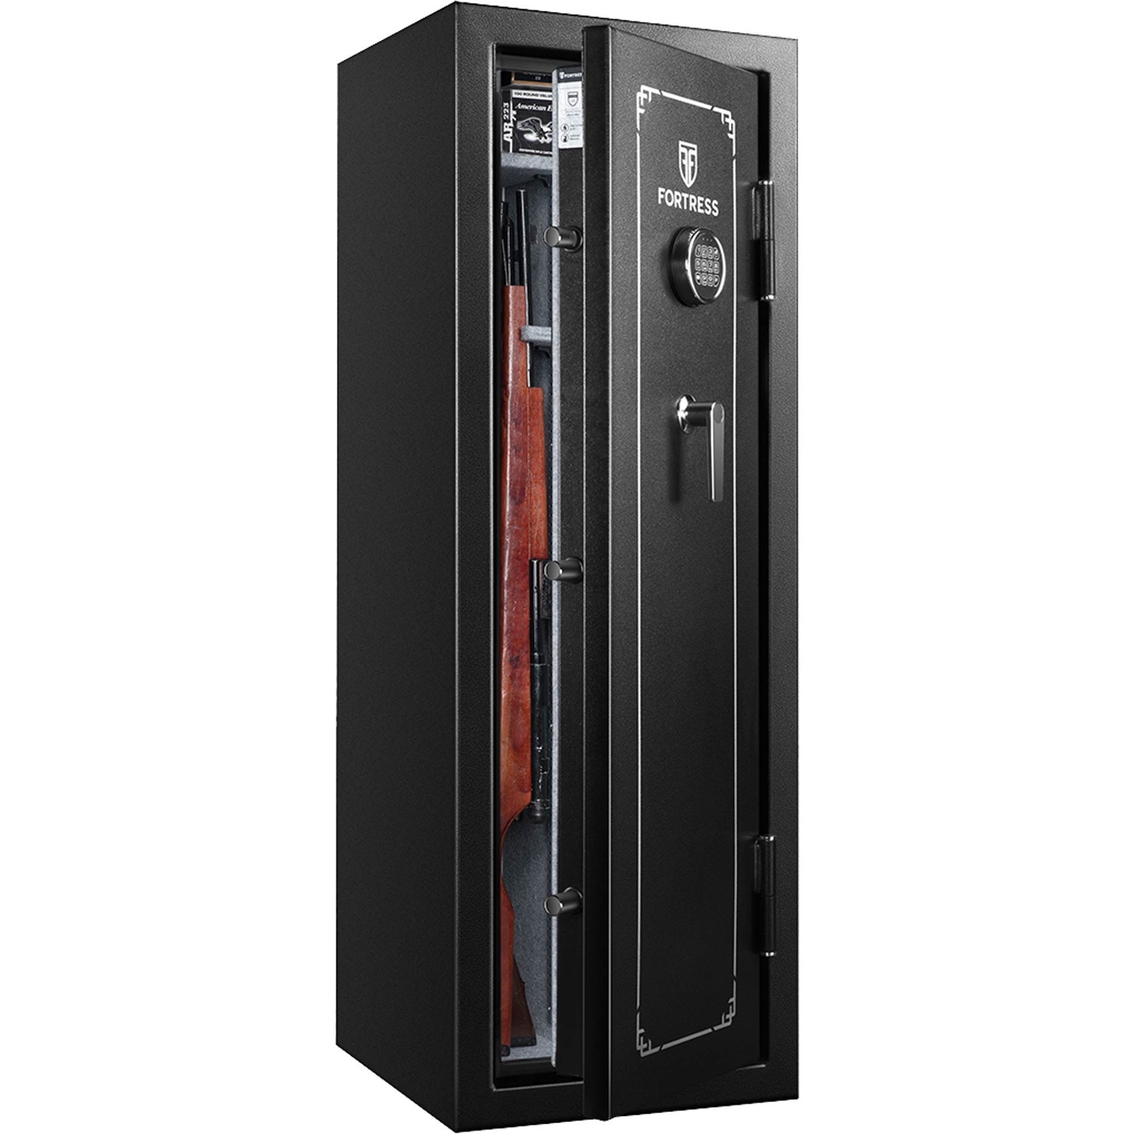 Fortress 14 Gun Fire Safe with E-Lock - Image 3 of 6